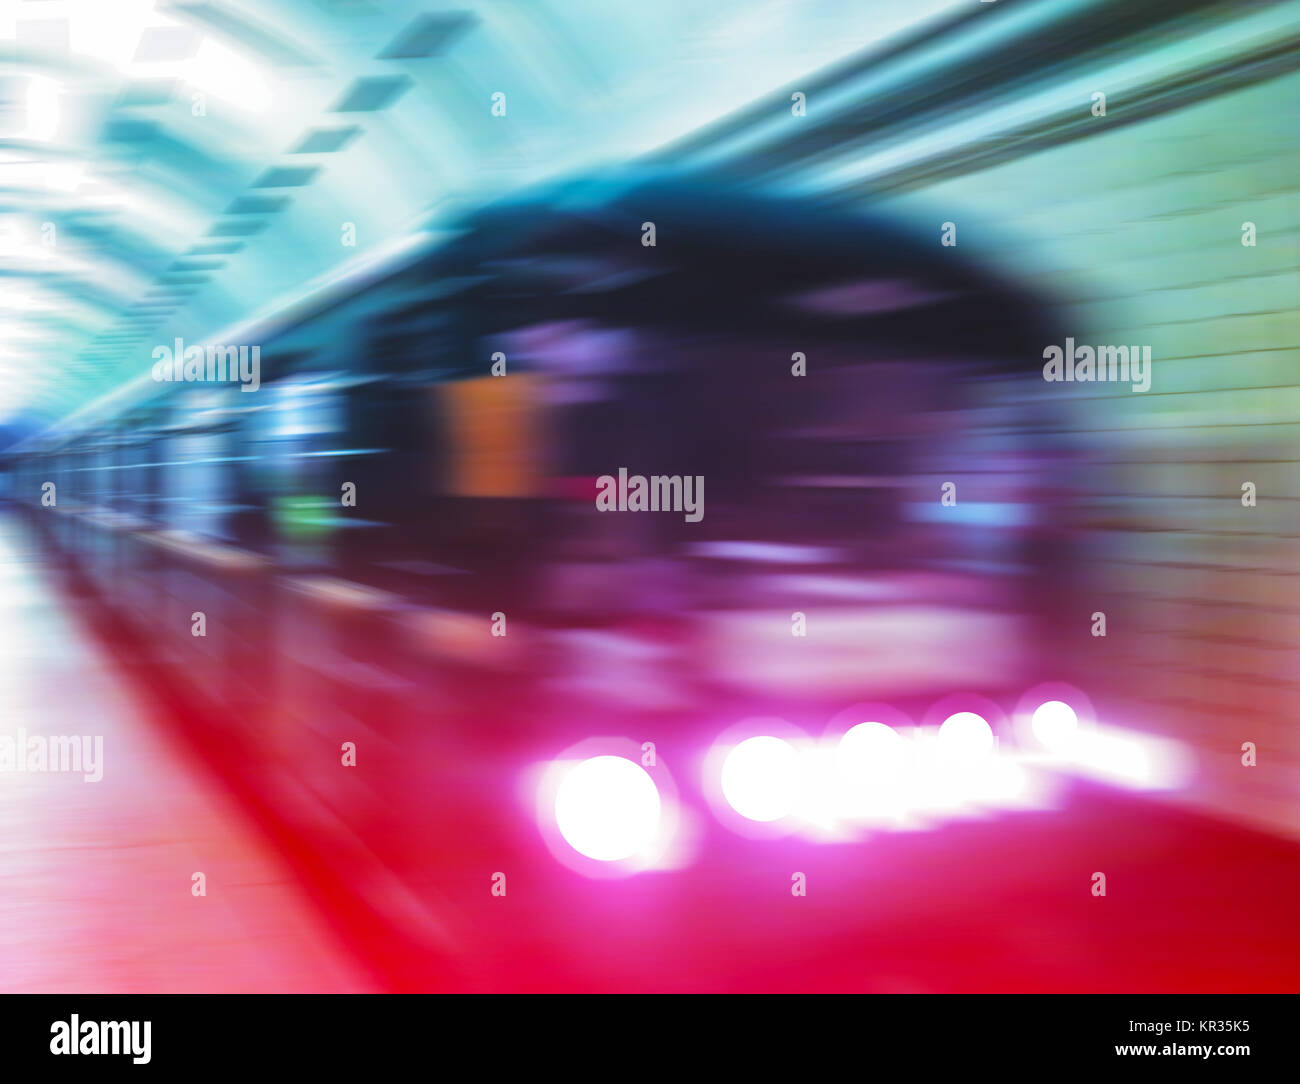 Diagonal metro train in motion abstraction background Stock Photo